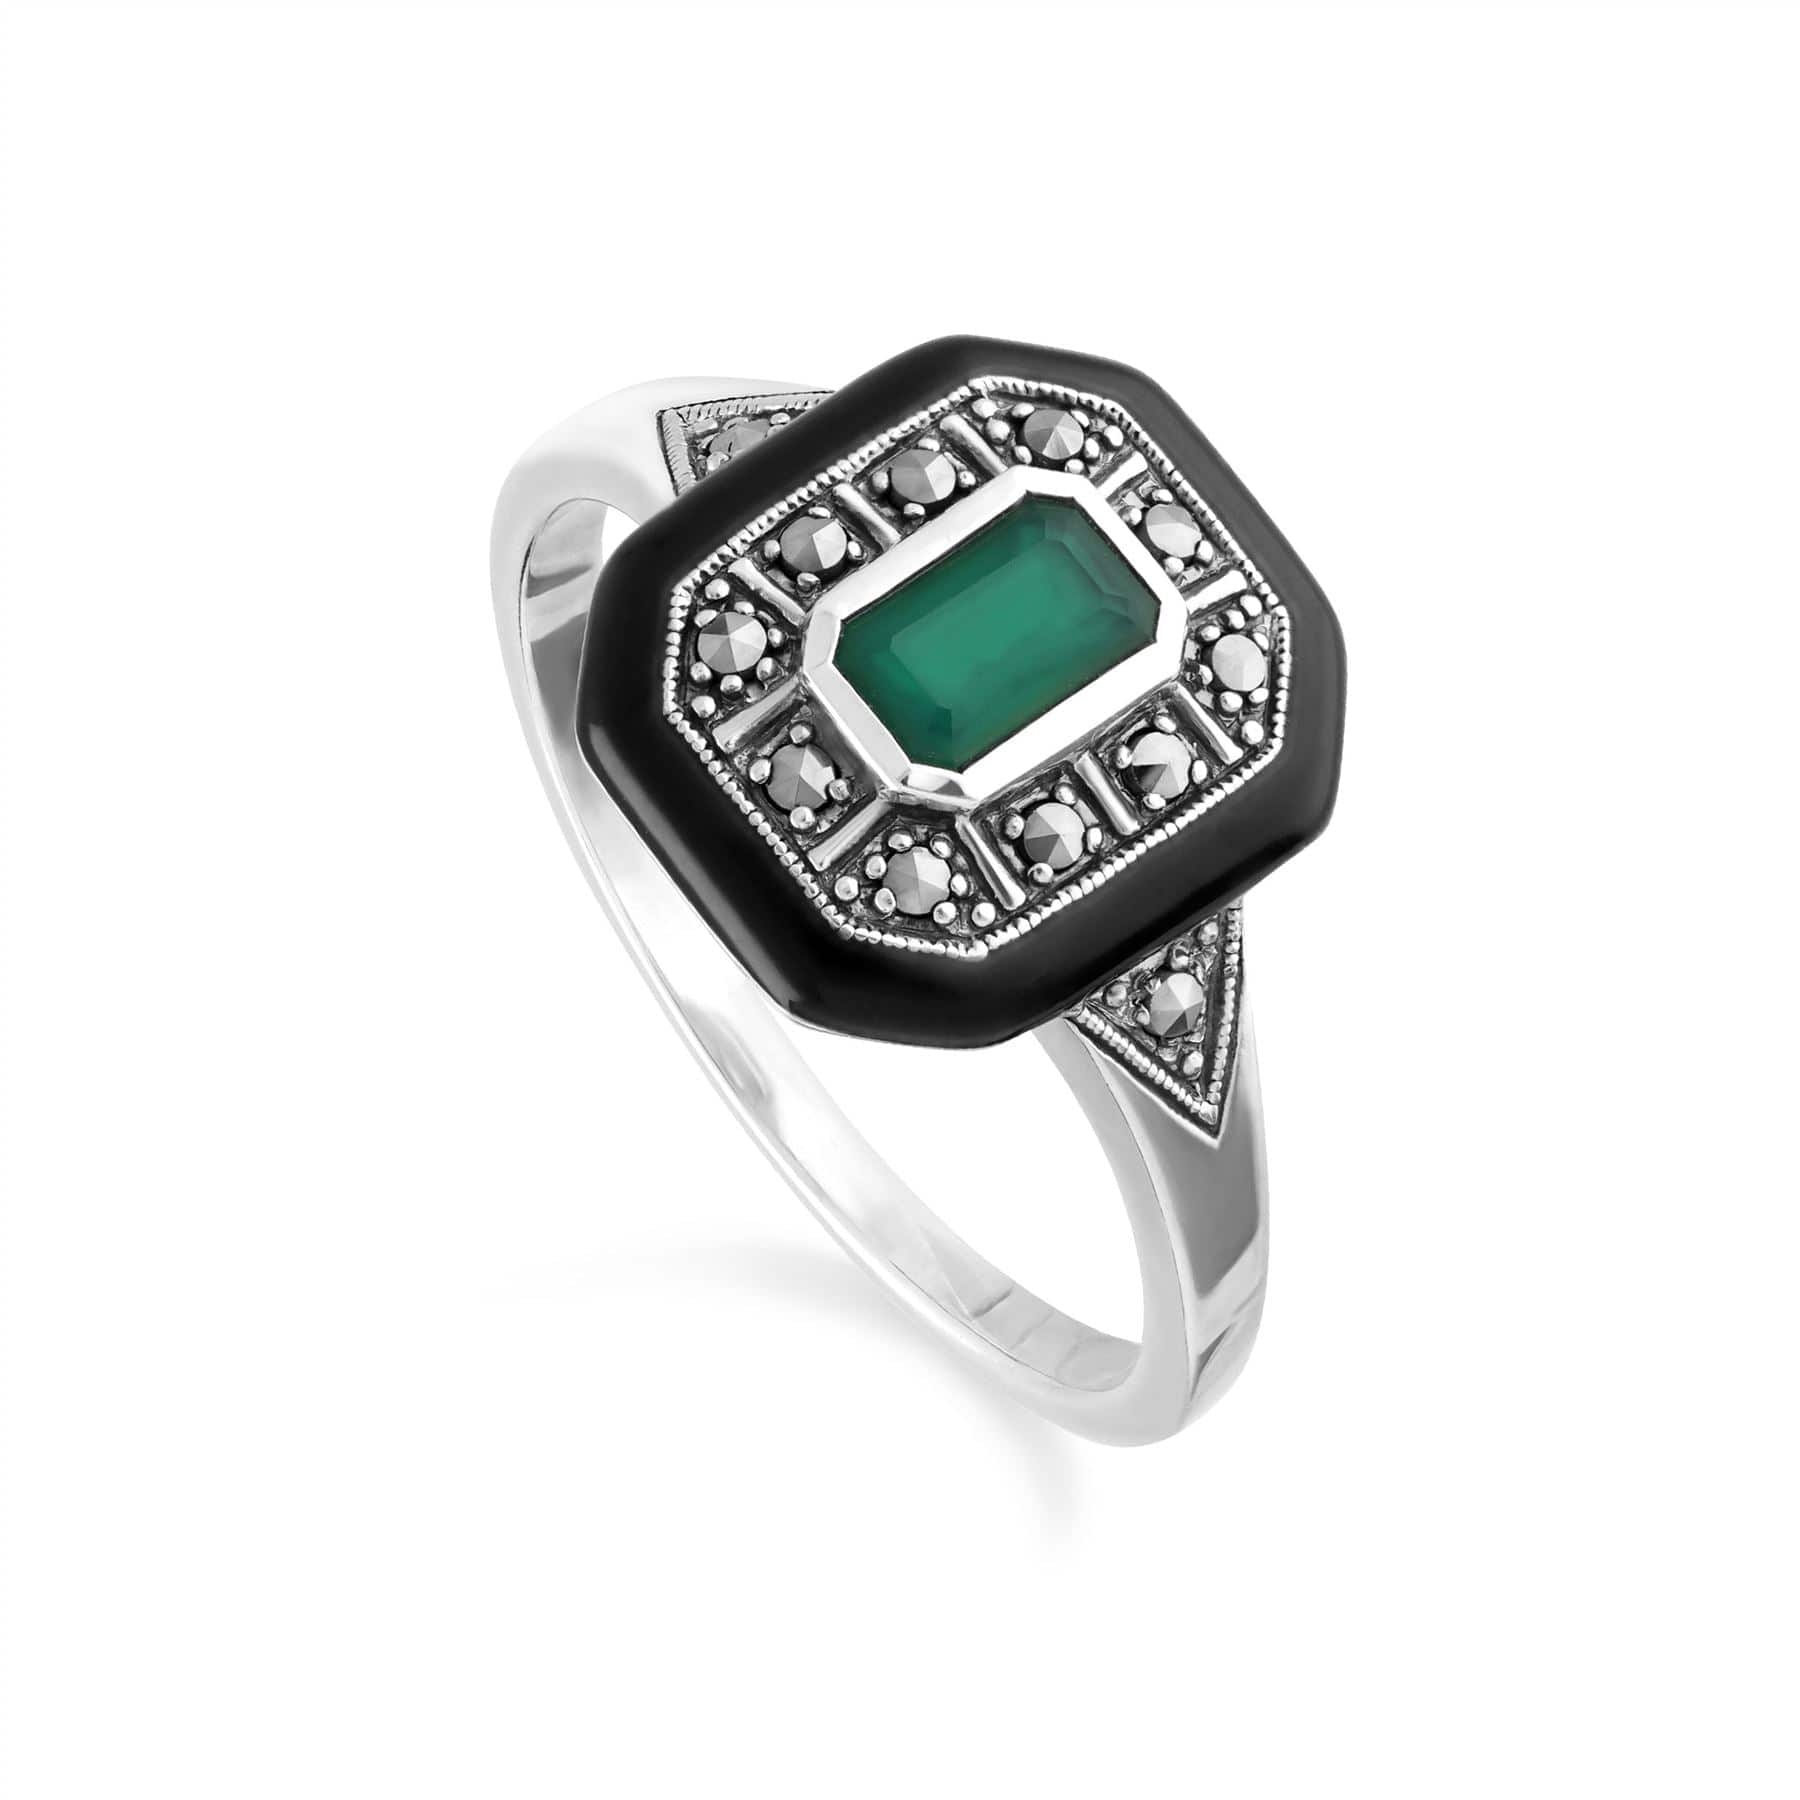 Image of Art Deco Inspired Chalcedony, Enamel & Marcasite Square Ring In Sterling Silver